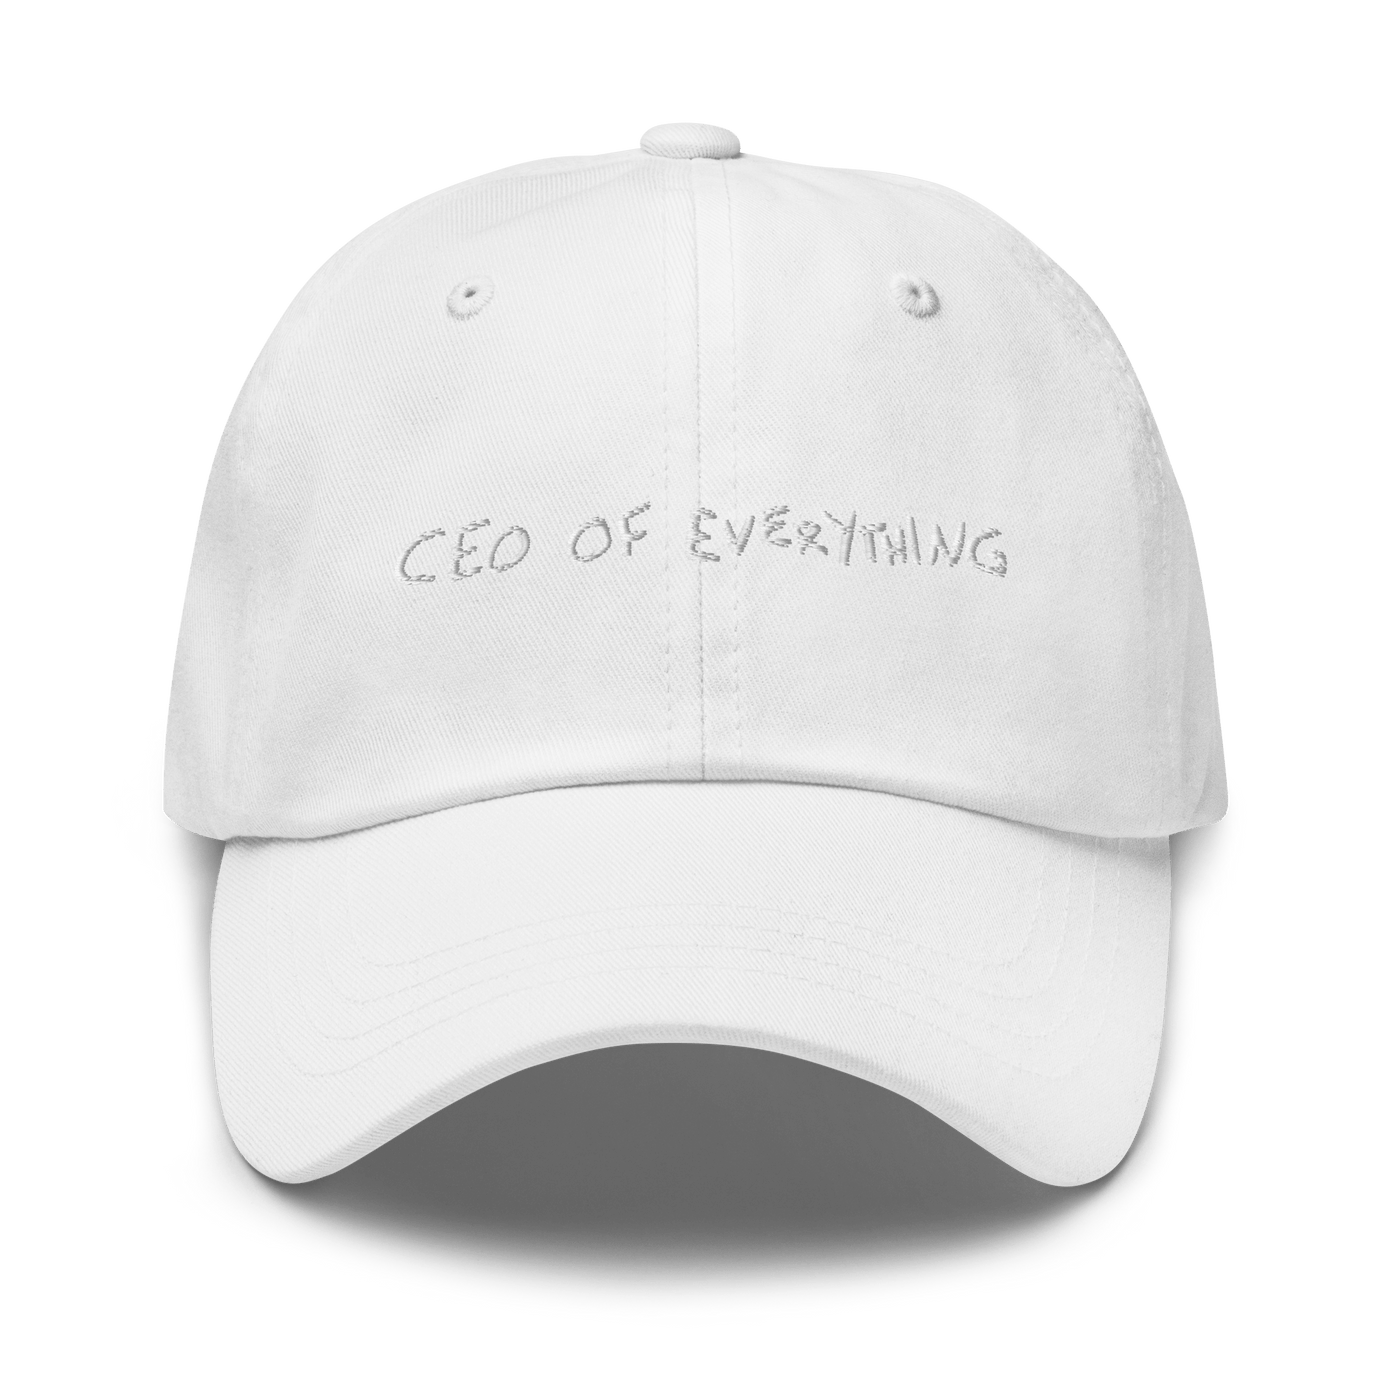 CEO of everything Dad hat - Light Blue - - Just Another Cap Store